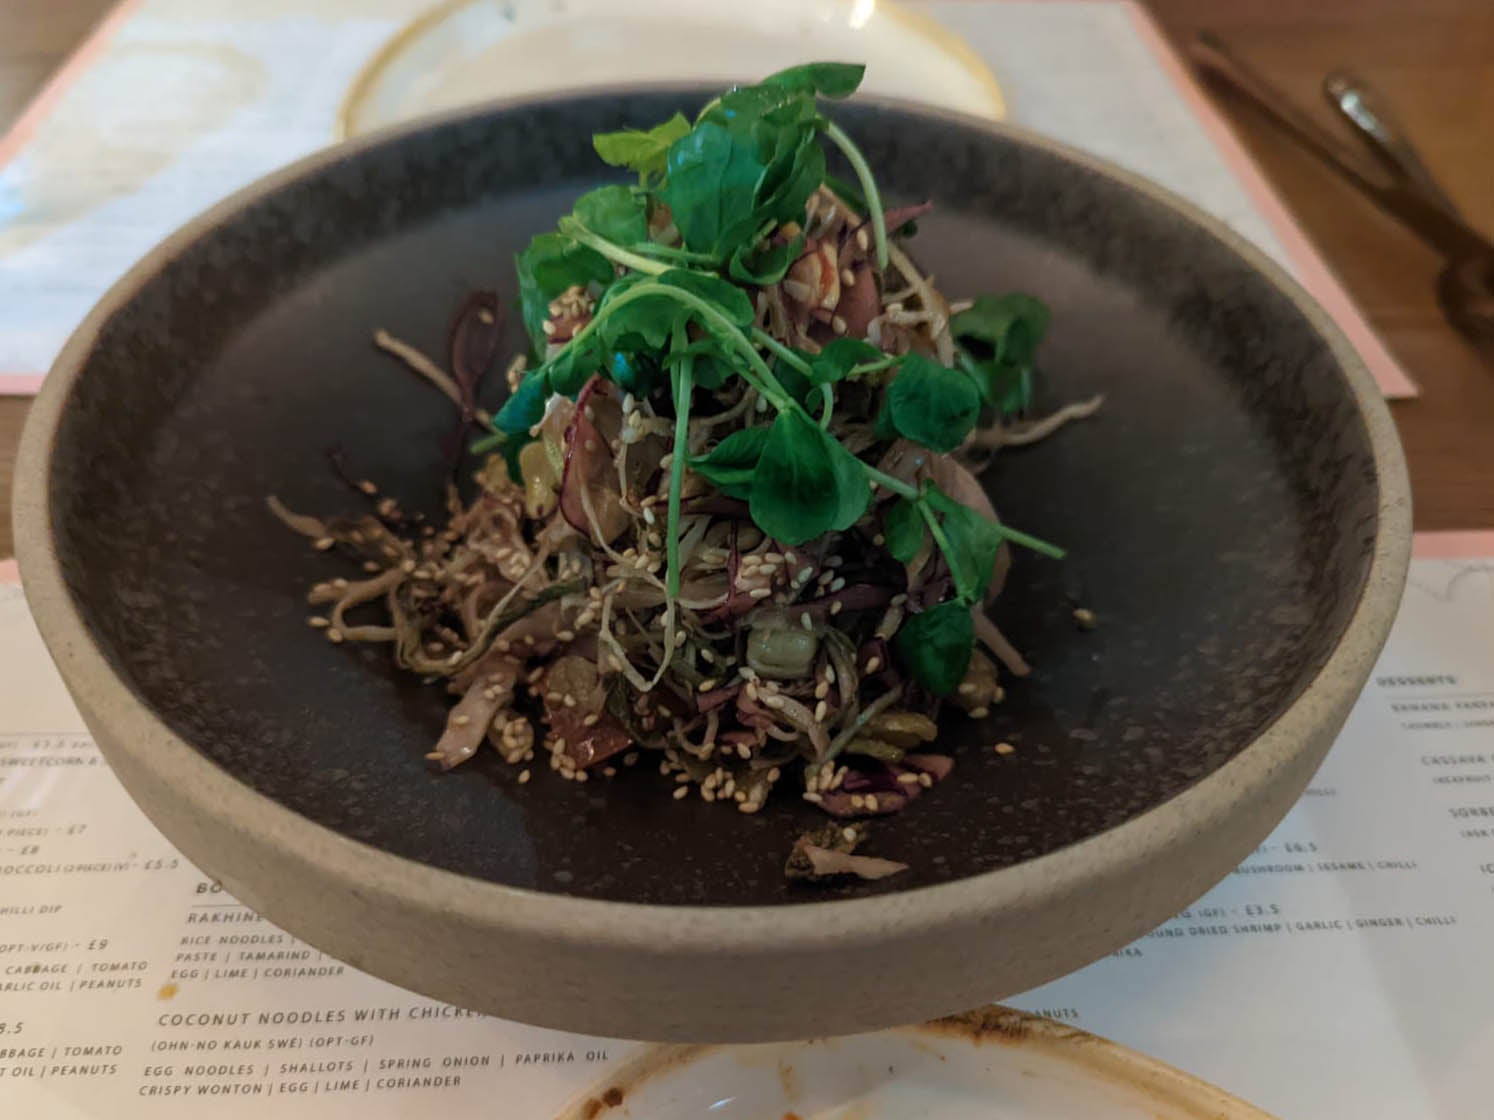 Tealeaf salad is both the restaurant’s and the country’s signature dish